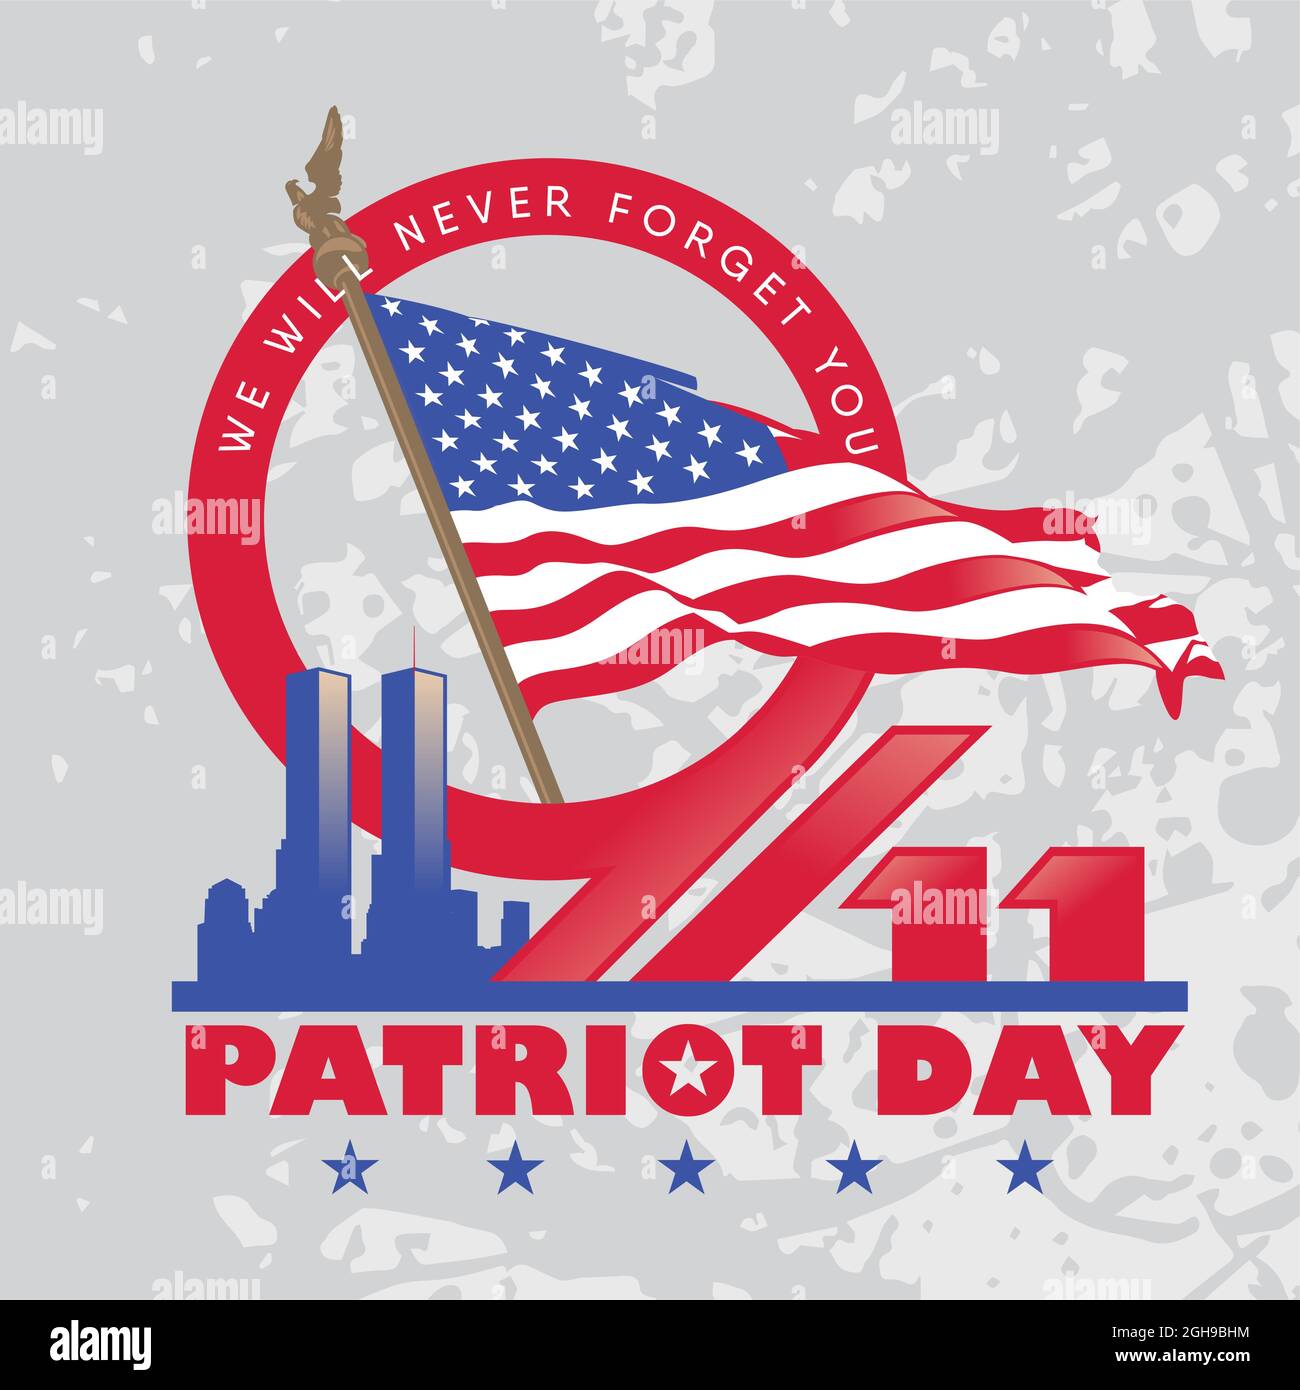 9-11 Patriot Day. We Will Never Forget. September 11, 2001 against the background of the shield and the Twin Towers in the skyline of New York. Stock Vector